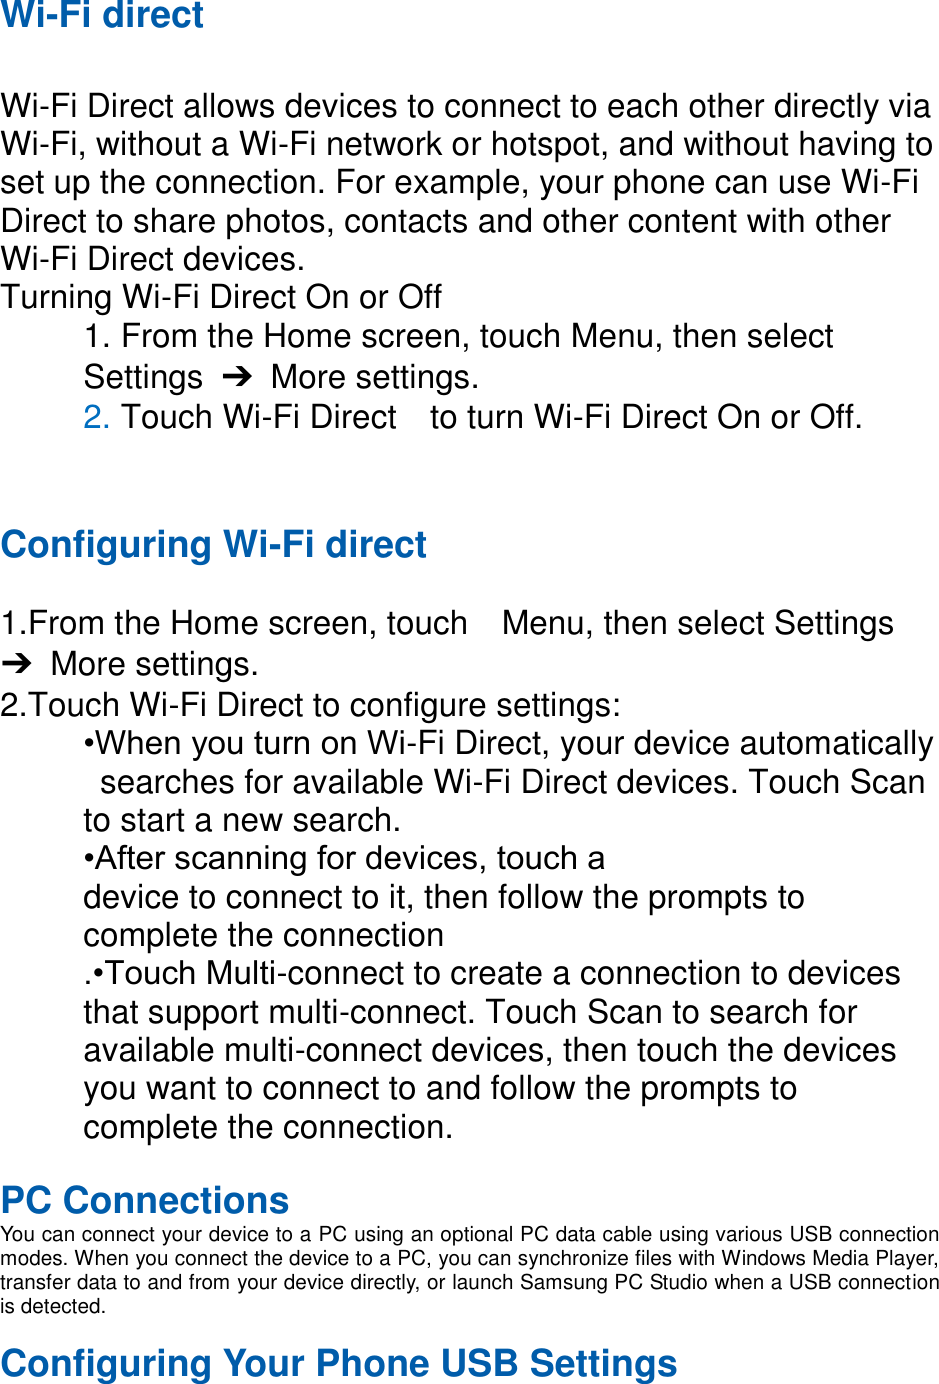 Wi-Fi direct  Wi-Fi Direct allows devices to connect to each other directly via Wi-Fi, without a Wi-Fi network or hotspot, and without having to set up the connection. For example, your phone can use Wi-Fi Direct to share photos, contacts and other content with other Wi-Fi Direct devices.   Turning Wi-Fi Direct On or Off 1. From the Home screen, touch Menu, then select   Settings  ➔  More settings. 2. Touch Wi-Fi Direct    to turn Wi-Fi Direct On or Off.   Configuring Wi-Fi direct    1.From the Home screen, touch    Menu, then select Settings ➔  More settings. 2.Touch Wi-Fi Direct to configure settings:   •When you turn on Wi-Fi Direct, your device automatically   searches for available Wi-Fi Direct devices. Touch Scan   to start a new search. •After scanning for devices, touch a   device to connect to it, then follow the prompts to   complete the connection .•Touch Multi-connect to create a connection to devices that support multi-connect. Touch Scan to search for available multi-connect devices, then touch the devices you want to connect to and follow the prompts to complete the connection.    PC Connections You can connect your device to a PC using an optional PC data cable using various USB connection modes. When you connect the device to a PC, you can synchronize files with Windows Media Player, transfer data to and from your device directly, or launch Samsung PC Studio when a USB connection is detected.  Configuring Your Phone USB Settings 